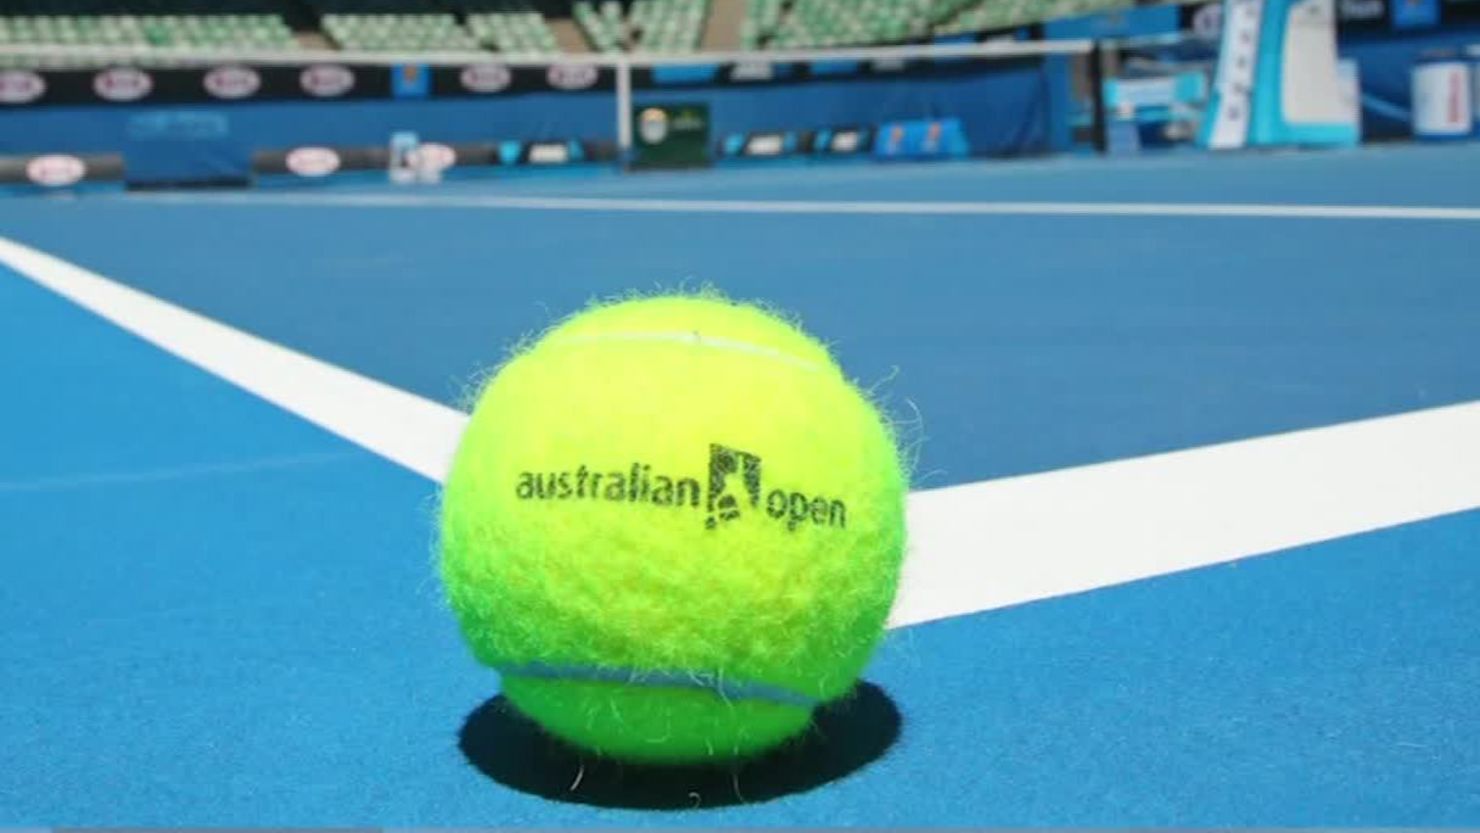 The BBC/BuzzFeed report comes as tennis gathers for the first Grand Slam of the year, the Australian Open. 